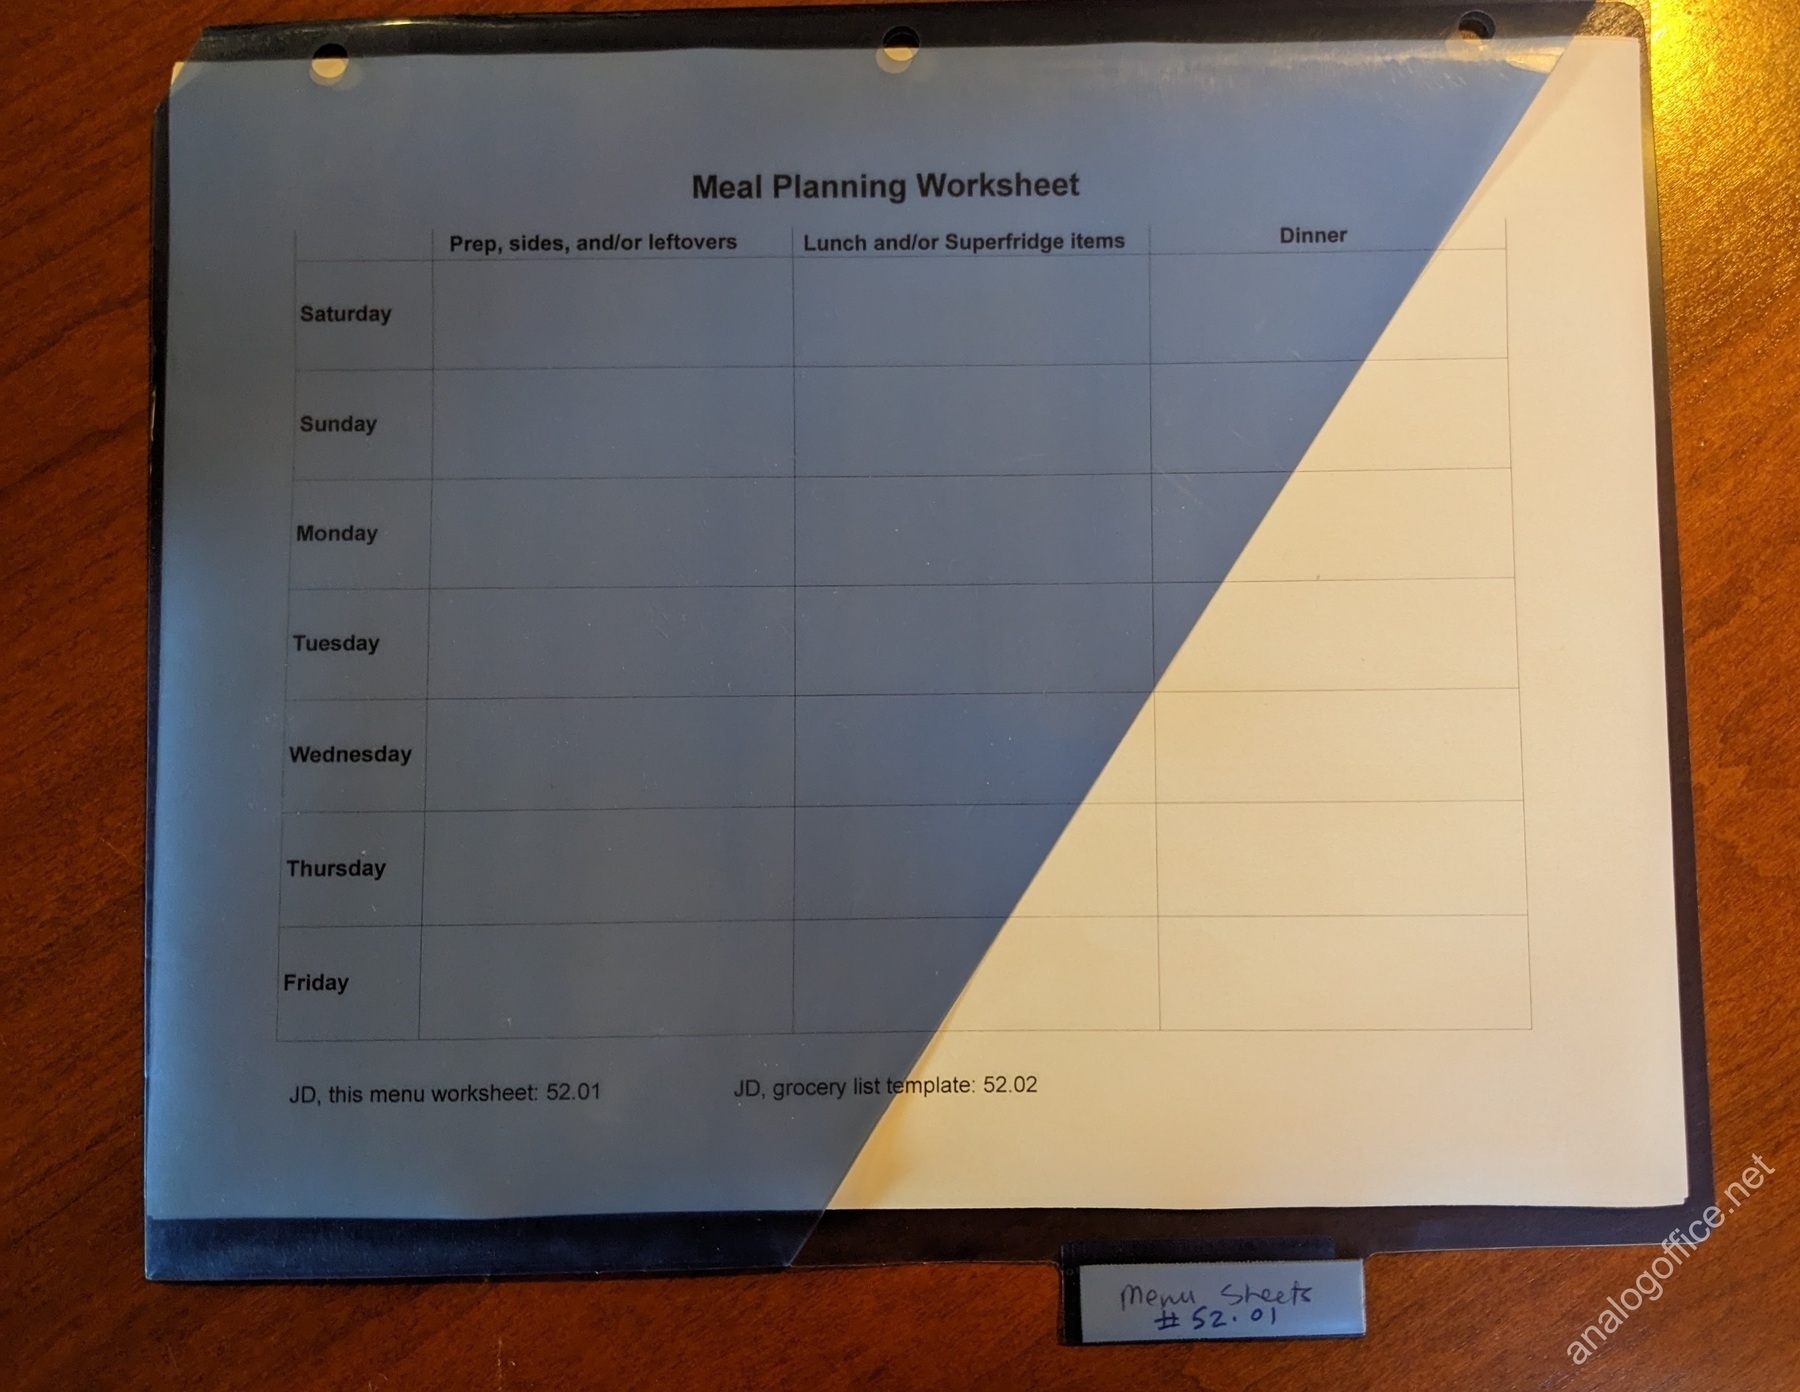 menu sheet in a binder tab folder, with the Johnny.Decimal number for the menu document in the binder tab slot